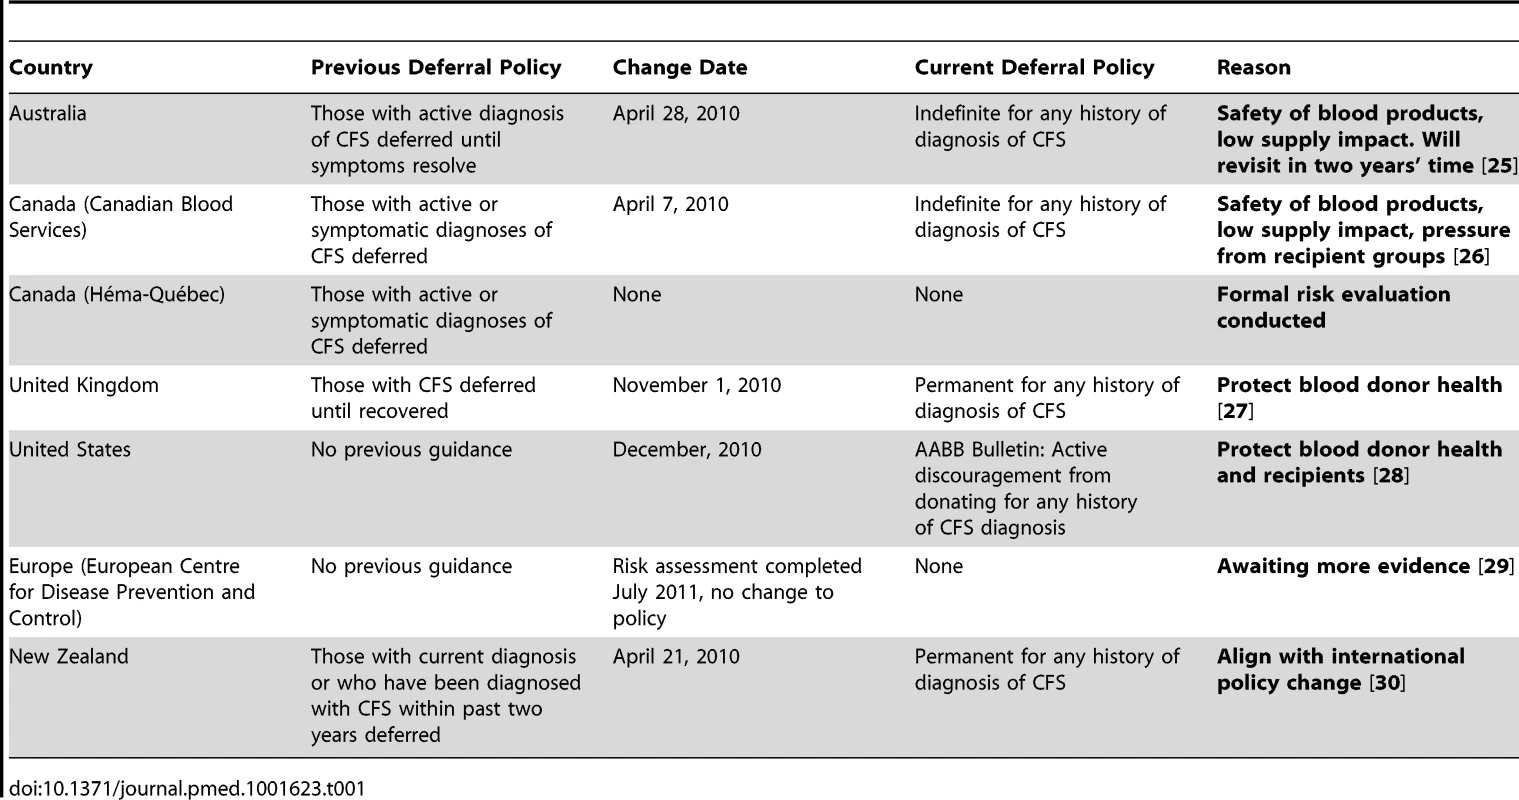 Countries and their past and present deferral policies relating to CFS and the effects of XMRV on deferral policies.